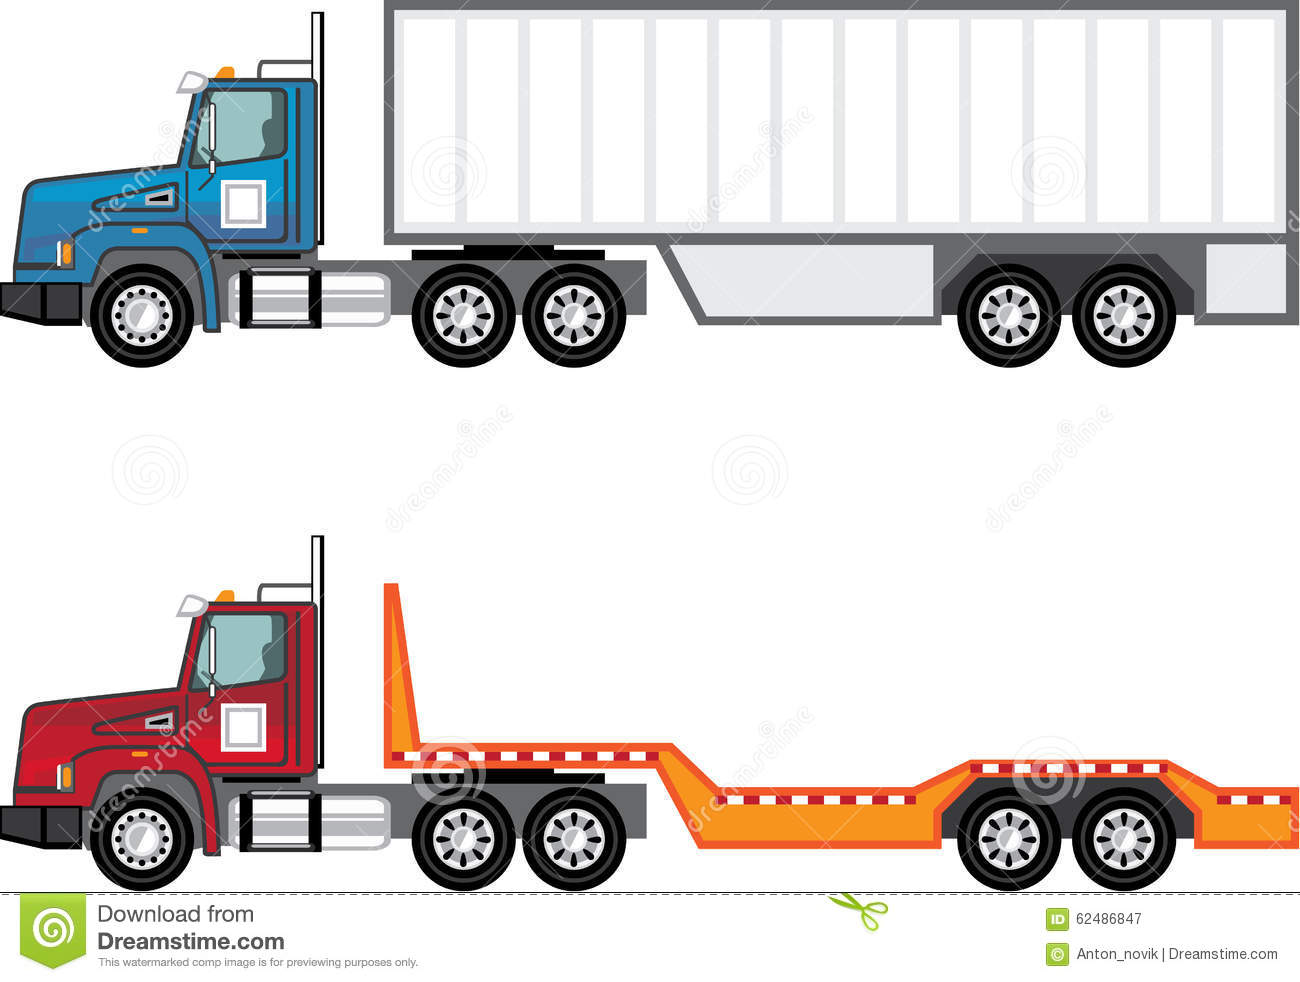 Truck Clipart Free  Free download best Truck Clipart Free on ClipArtMag.com